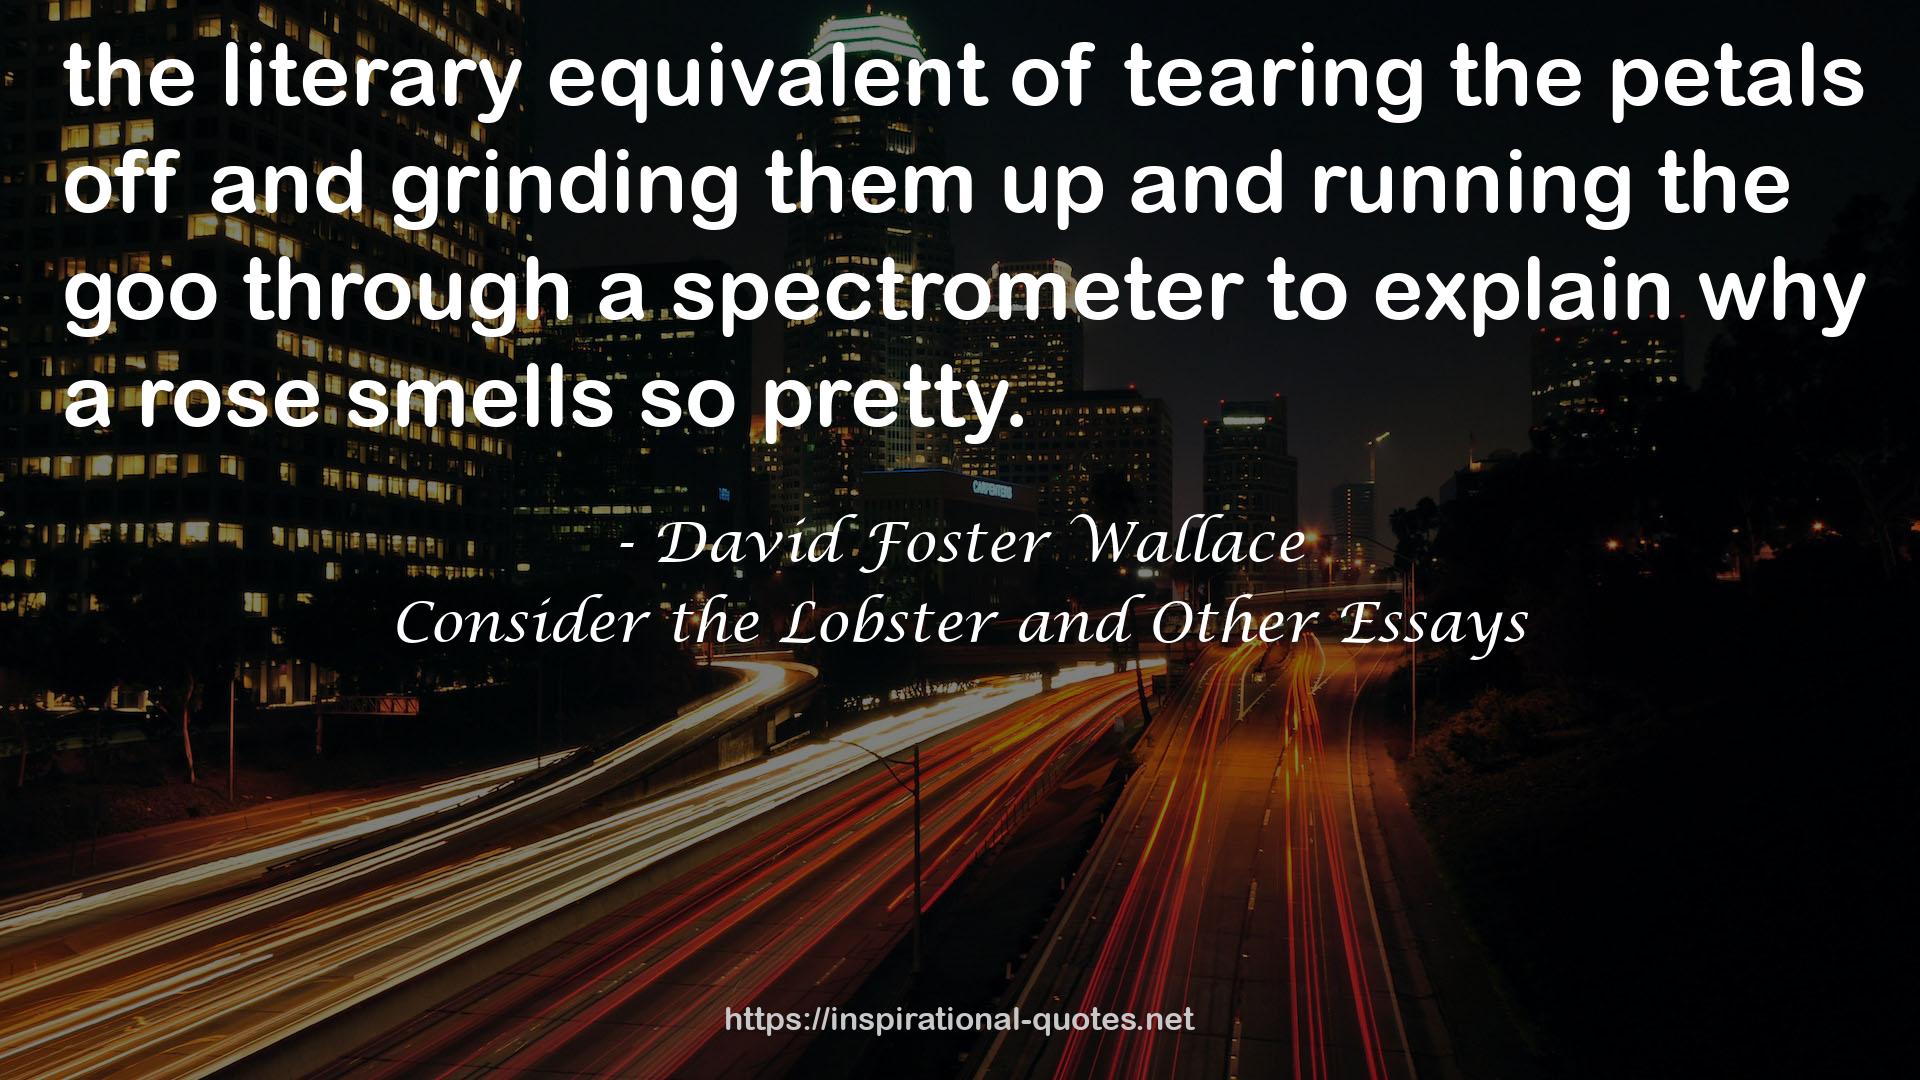 Consider the Lobster and Other Essays QUOTES